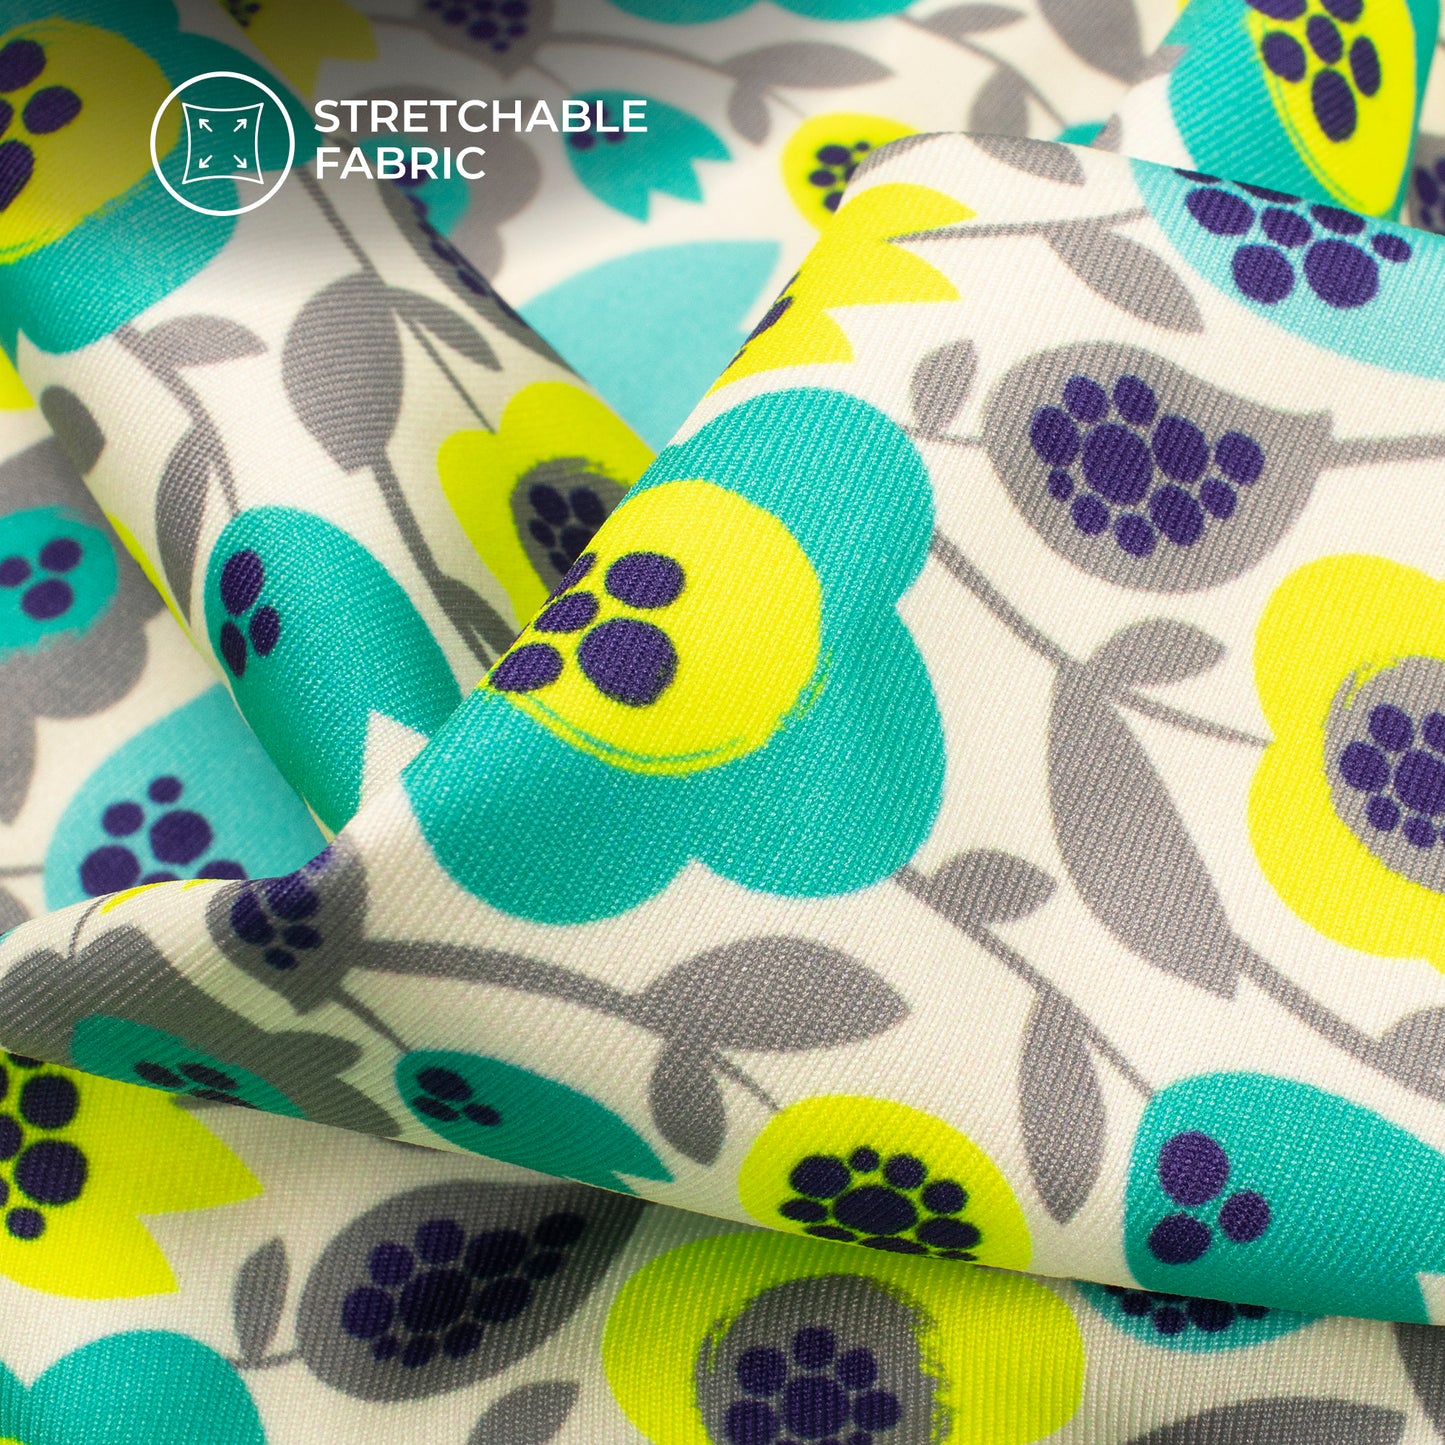 Neon Floral Finesse: Luxurious Digital Print Lycra Fabric (Width 58 Inches)